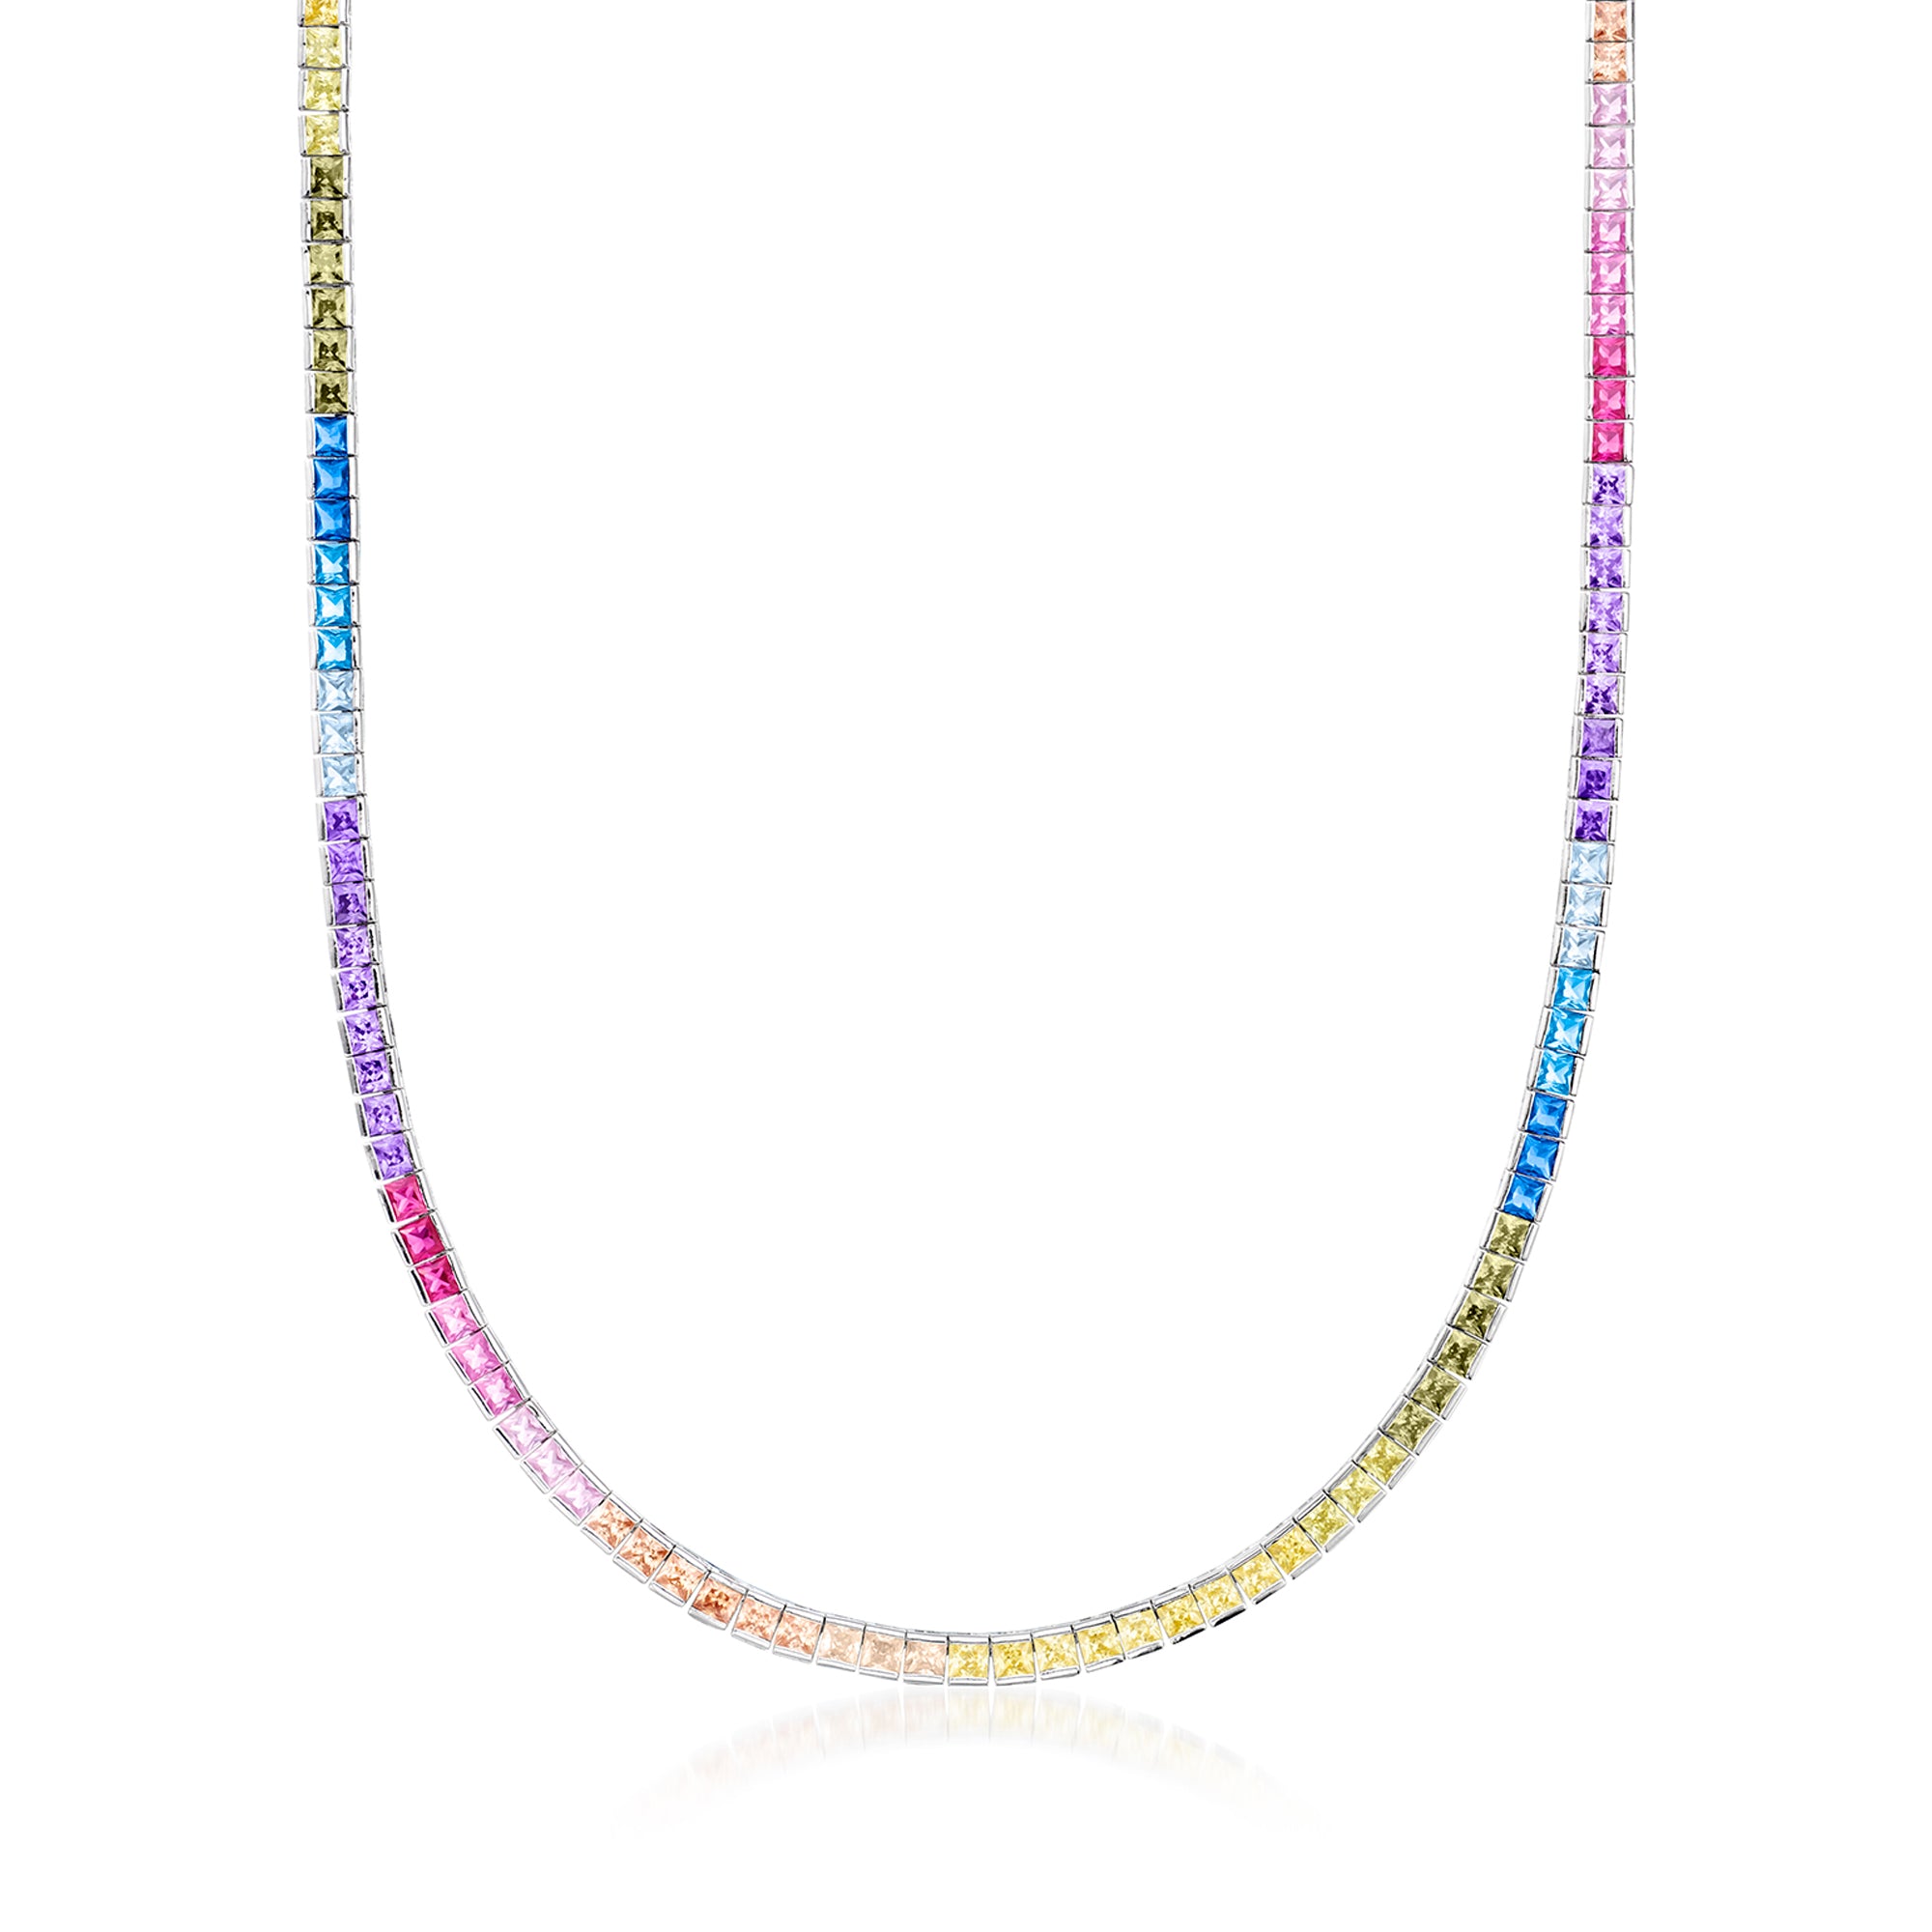 Ross-simons Simulated Multicolored Sapphire Tennis Necklace In Sterling Silver